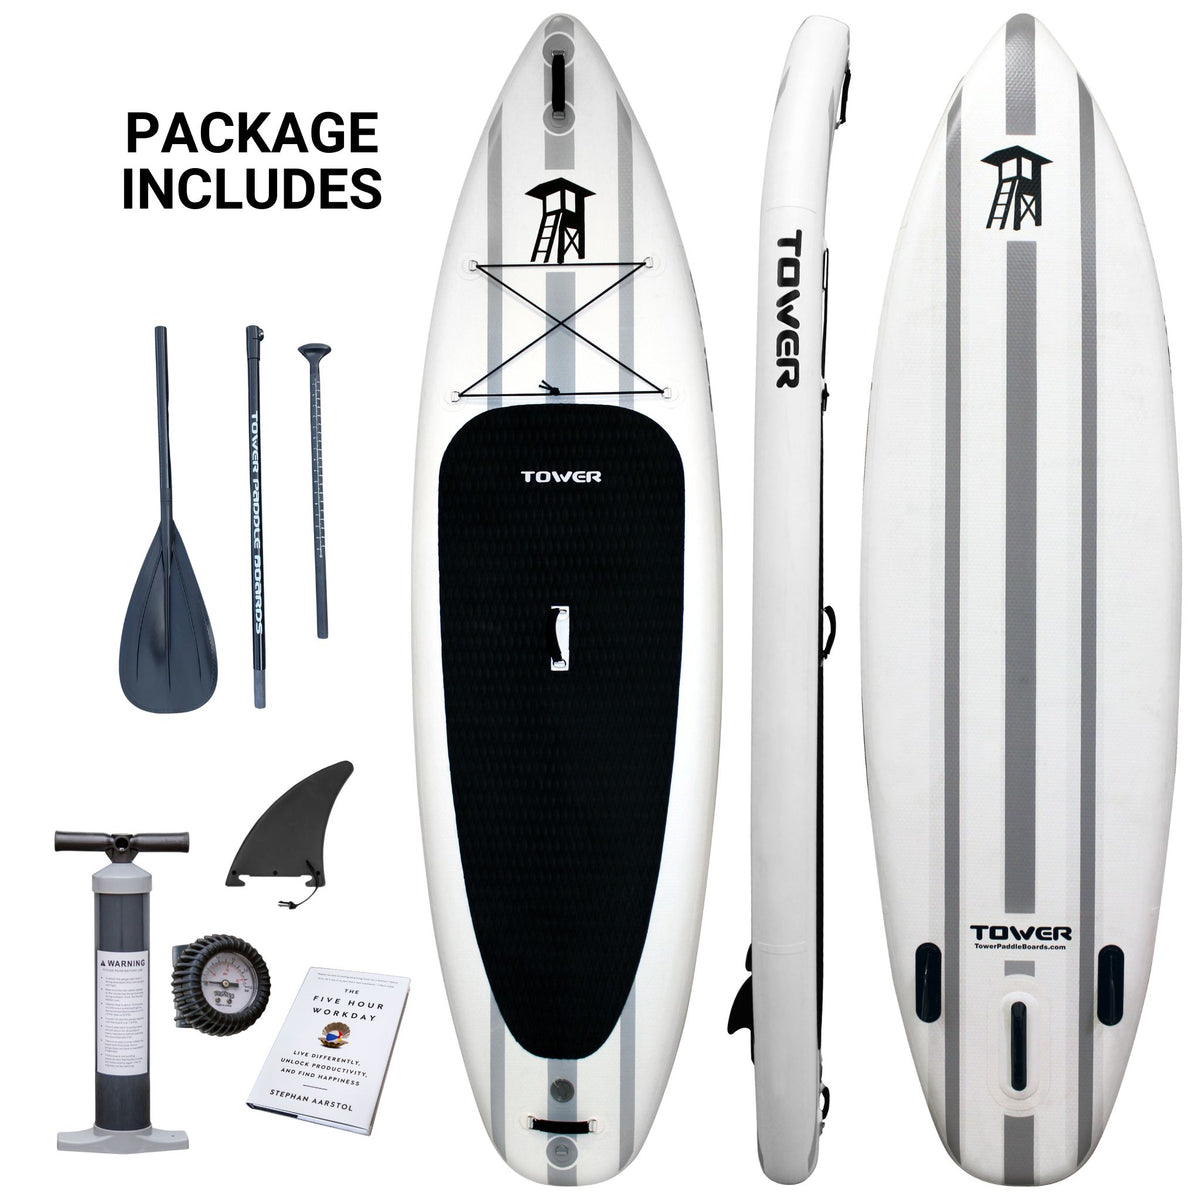 Stand Paddle Board Accessories, Inflatable Surf Paddle Boards